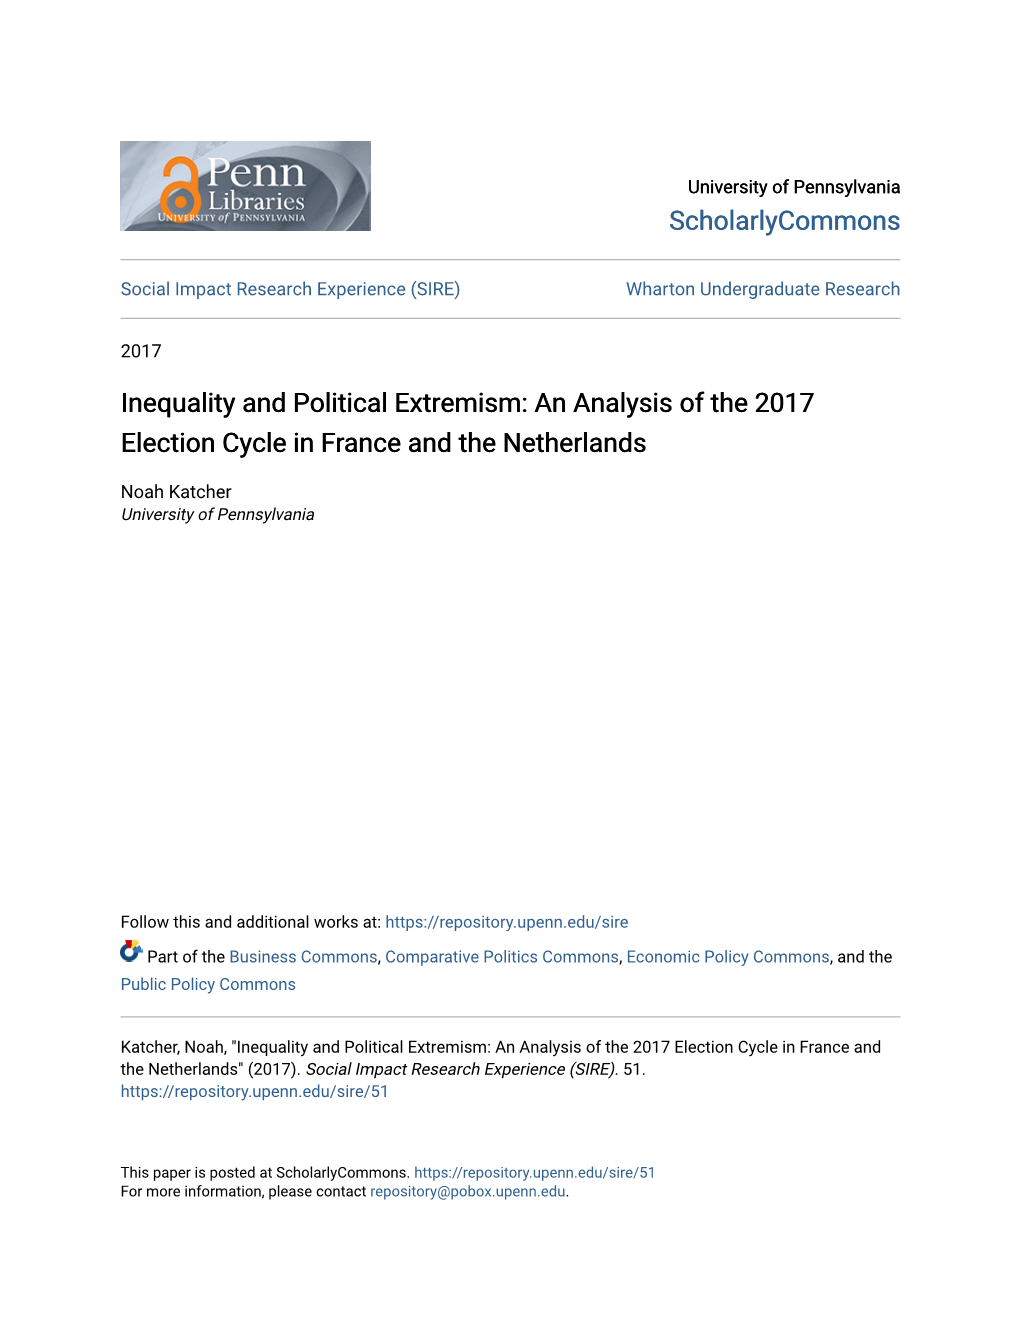 An Analysis of the 2017 Election Cycle in France and the Netherlands